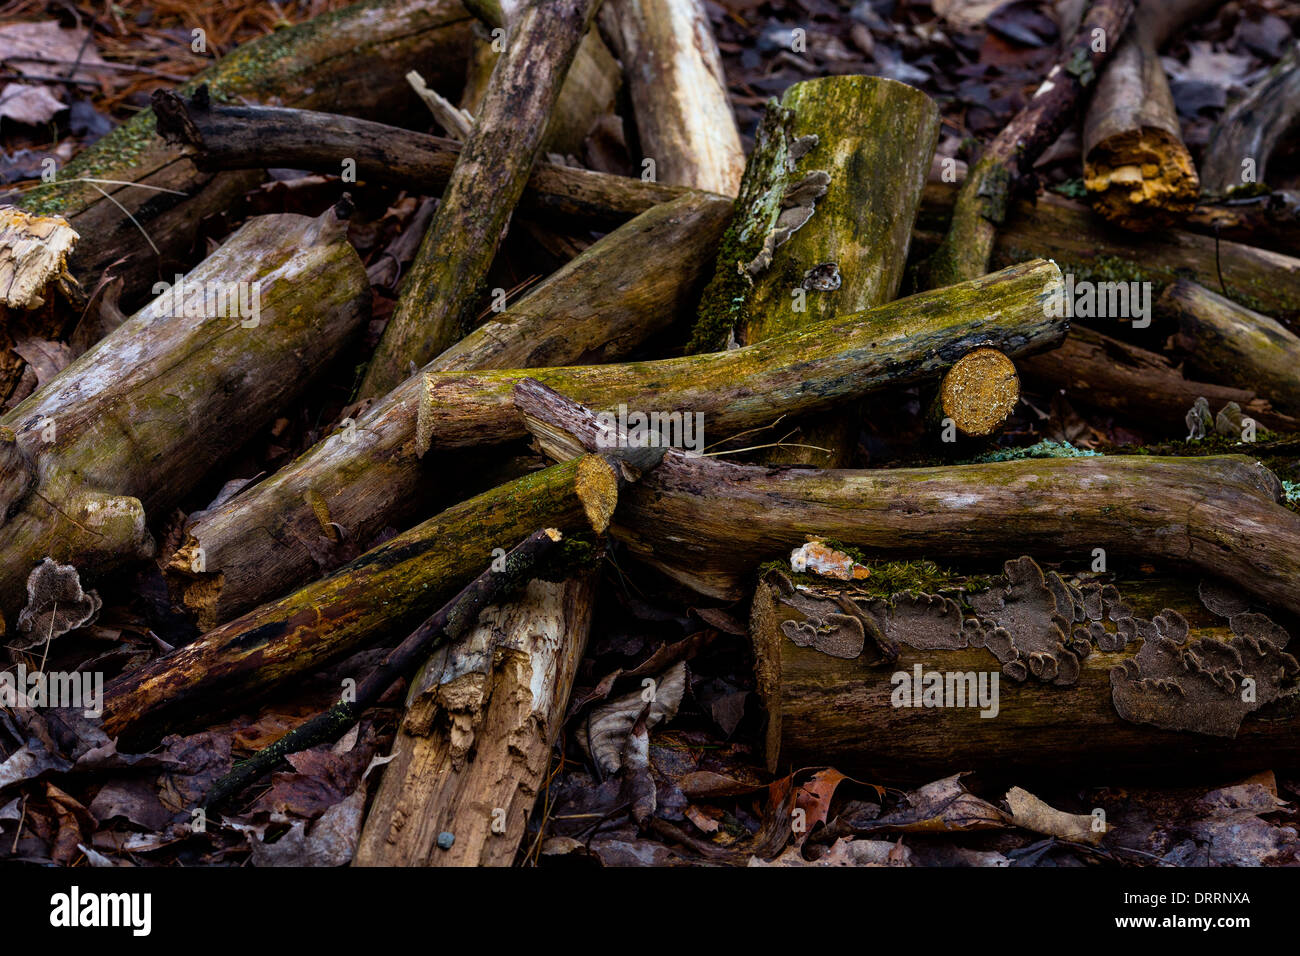 A stack of moldy wood logs on a bed of leaves in Saugerties, New York, on 10 April 2013. Stock Photo